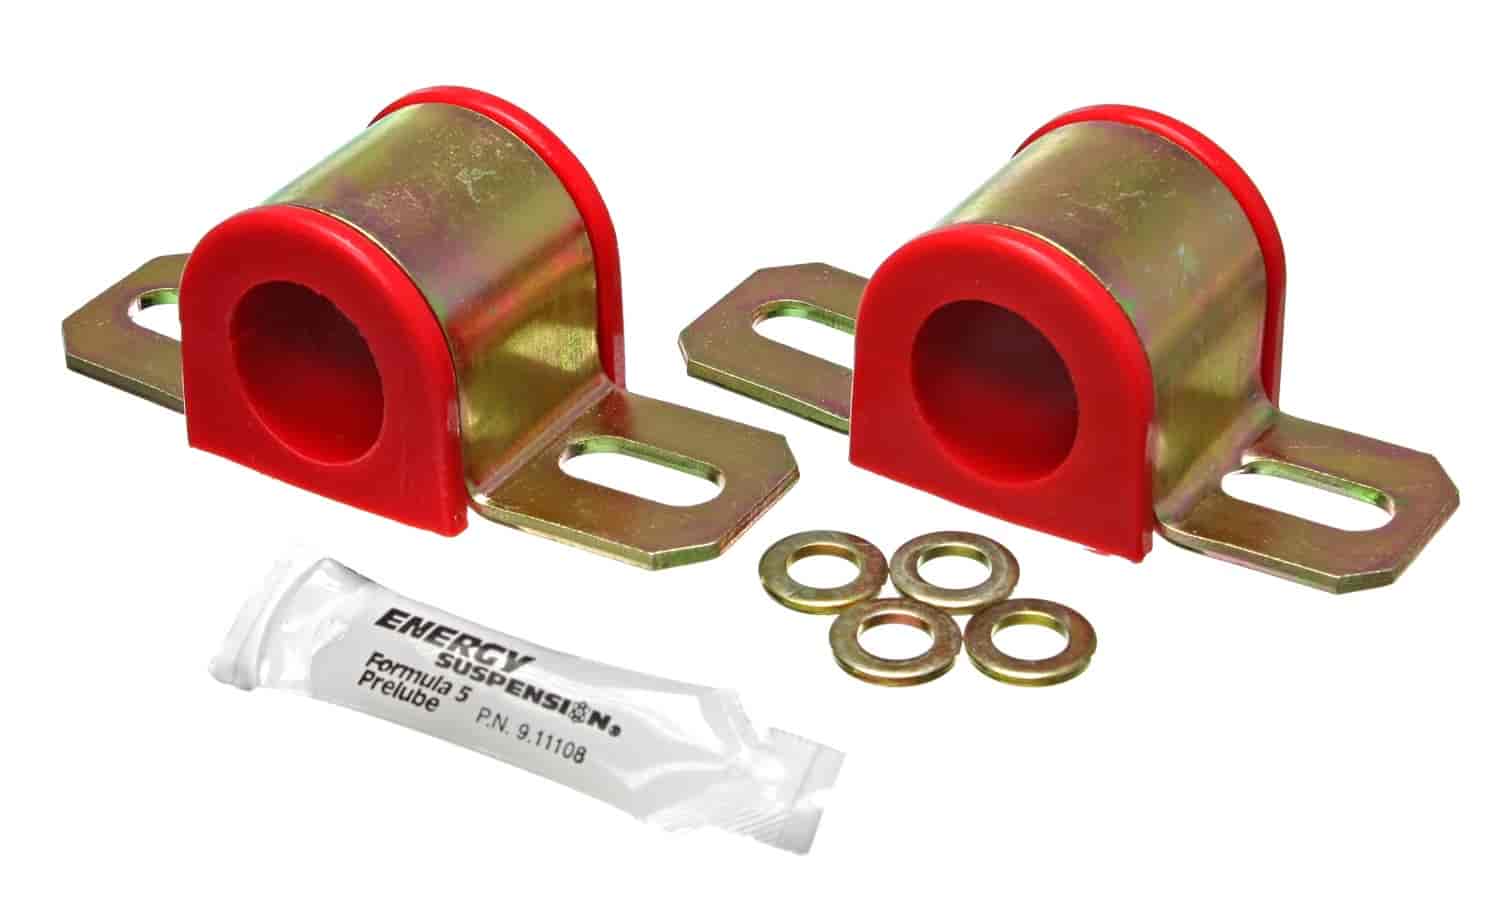 Universal Non-Greaseable Sway Bar Bushings 1-1/8" or 28.5mm